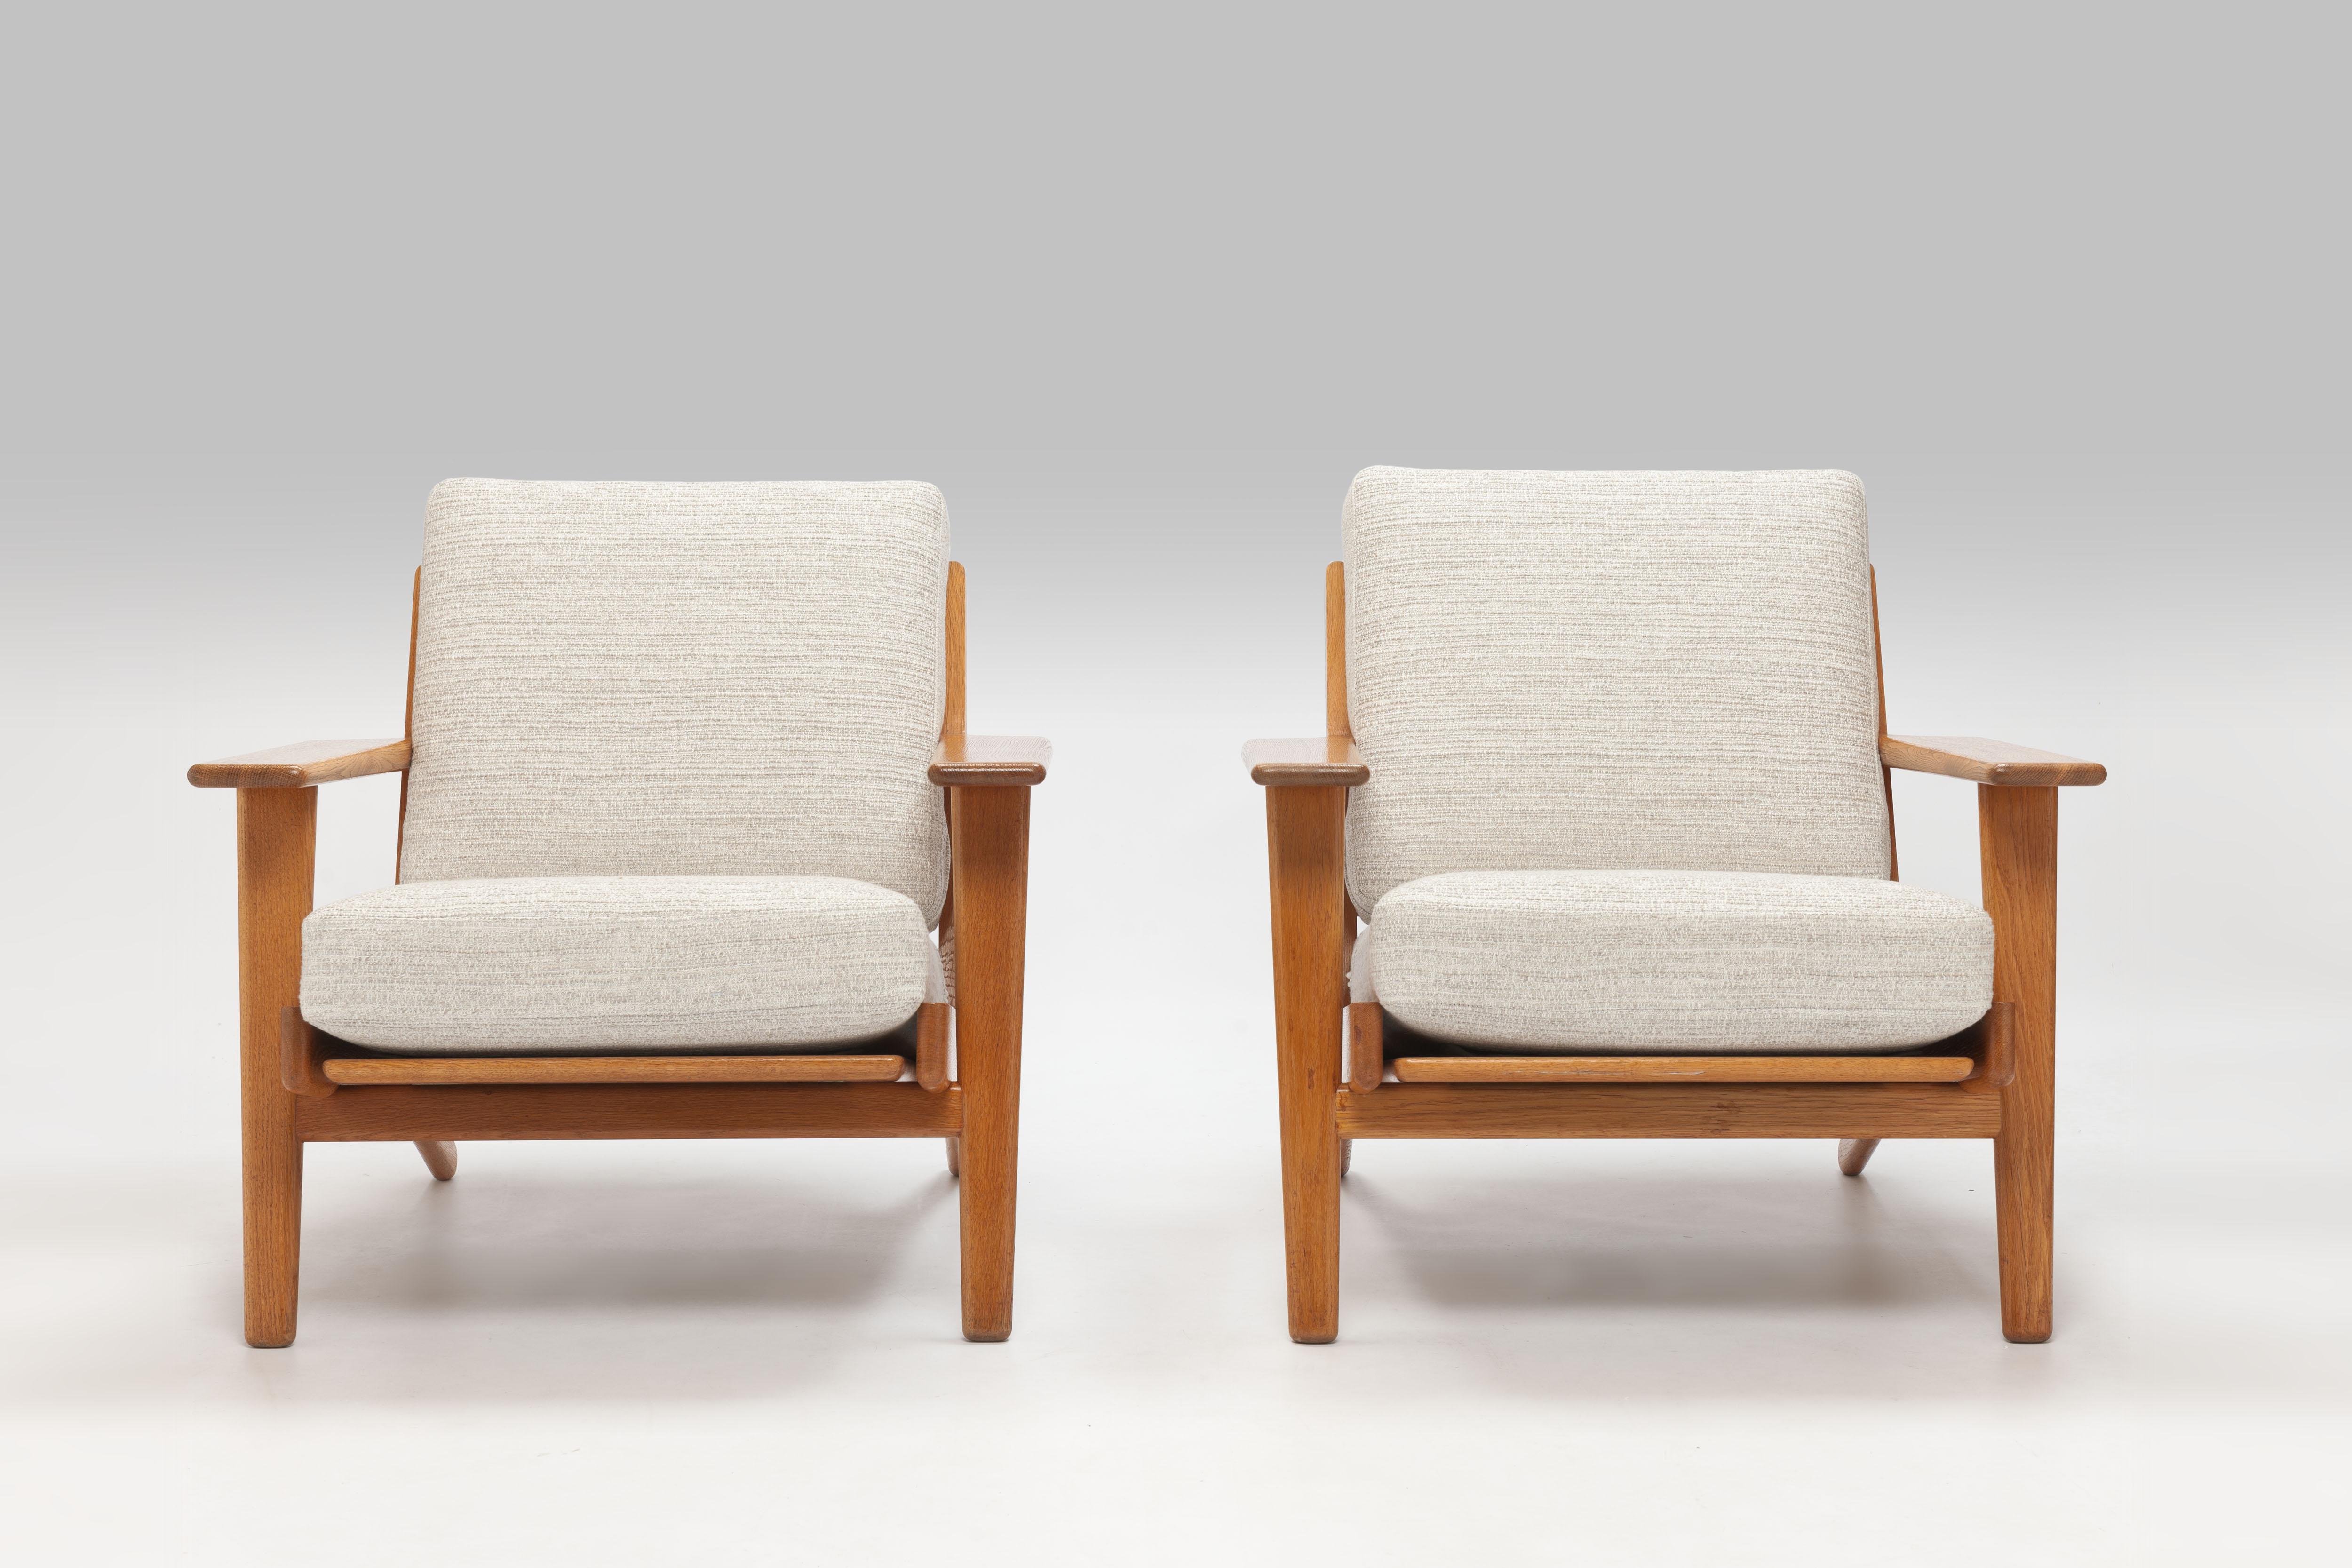 Lounge chair GE290 is a much appreciated early design by Hans Wegner. Wegner already designed the chair in 1953. The chair offers exceptional good seating comfort - partly due to cushions with innersprings - and much convenience is offered from the